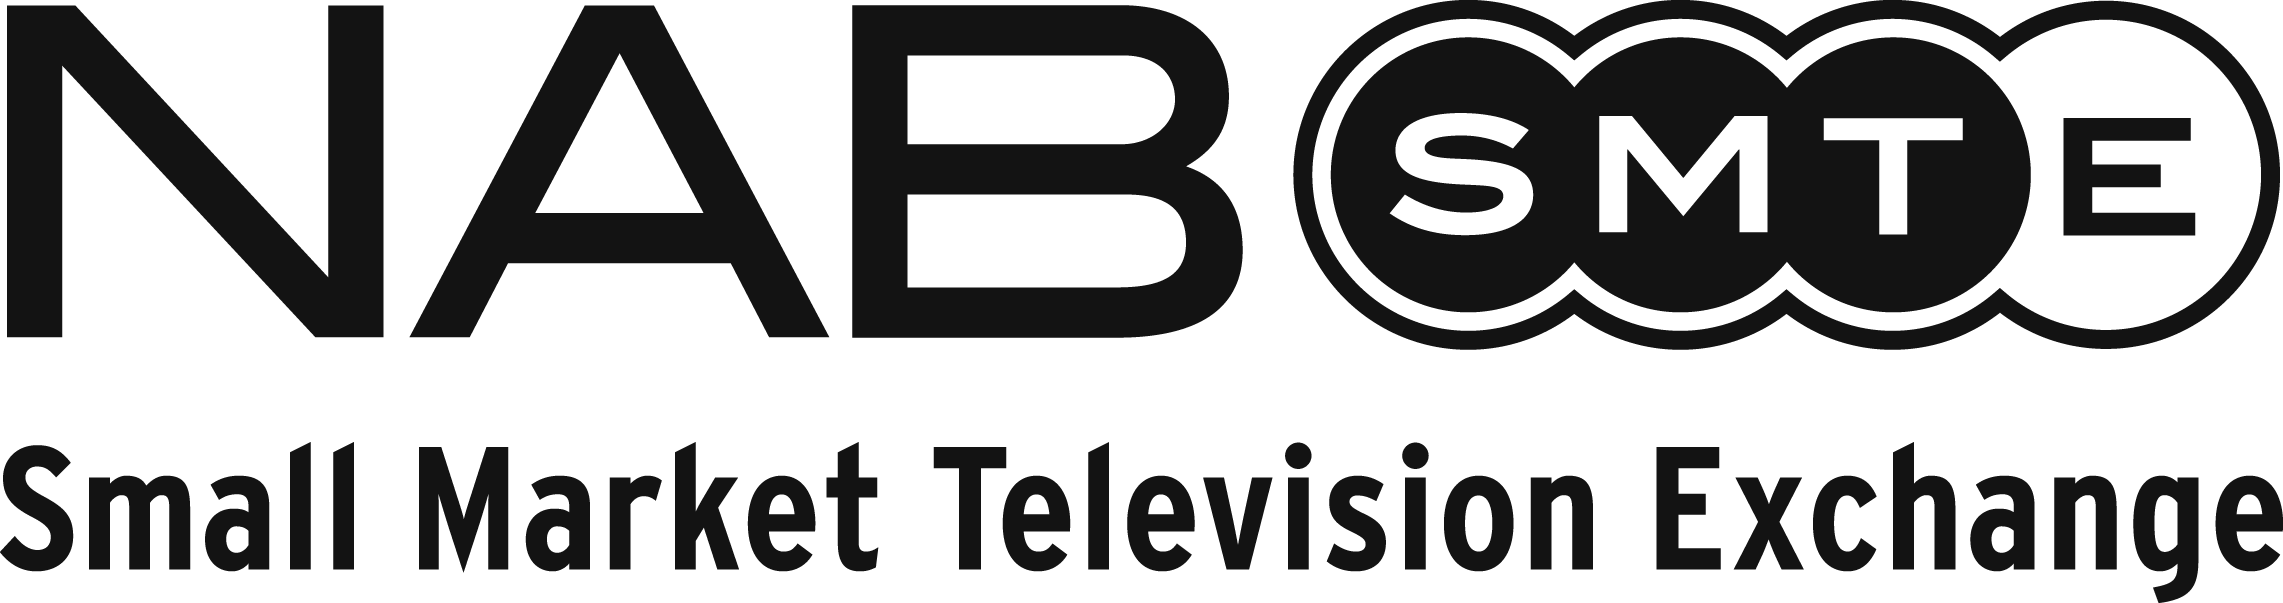 NAB Events: NAB Small Market Television Exchange Overview